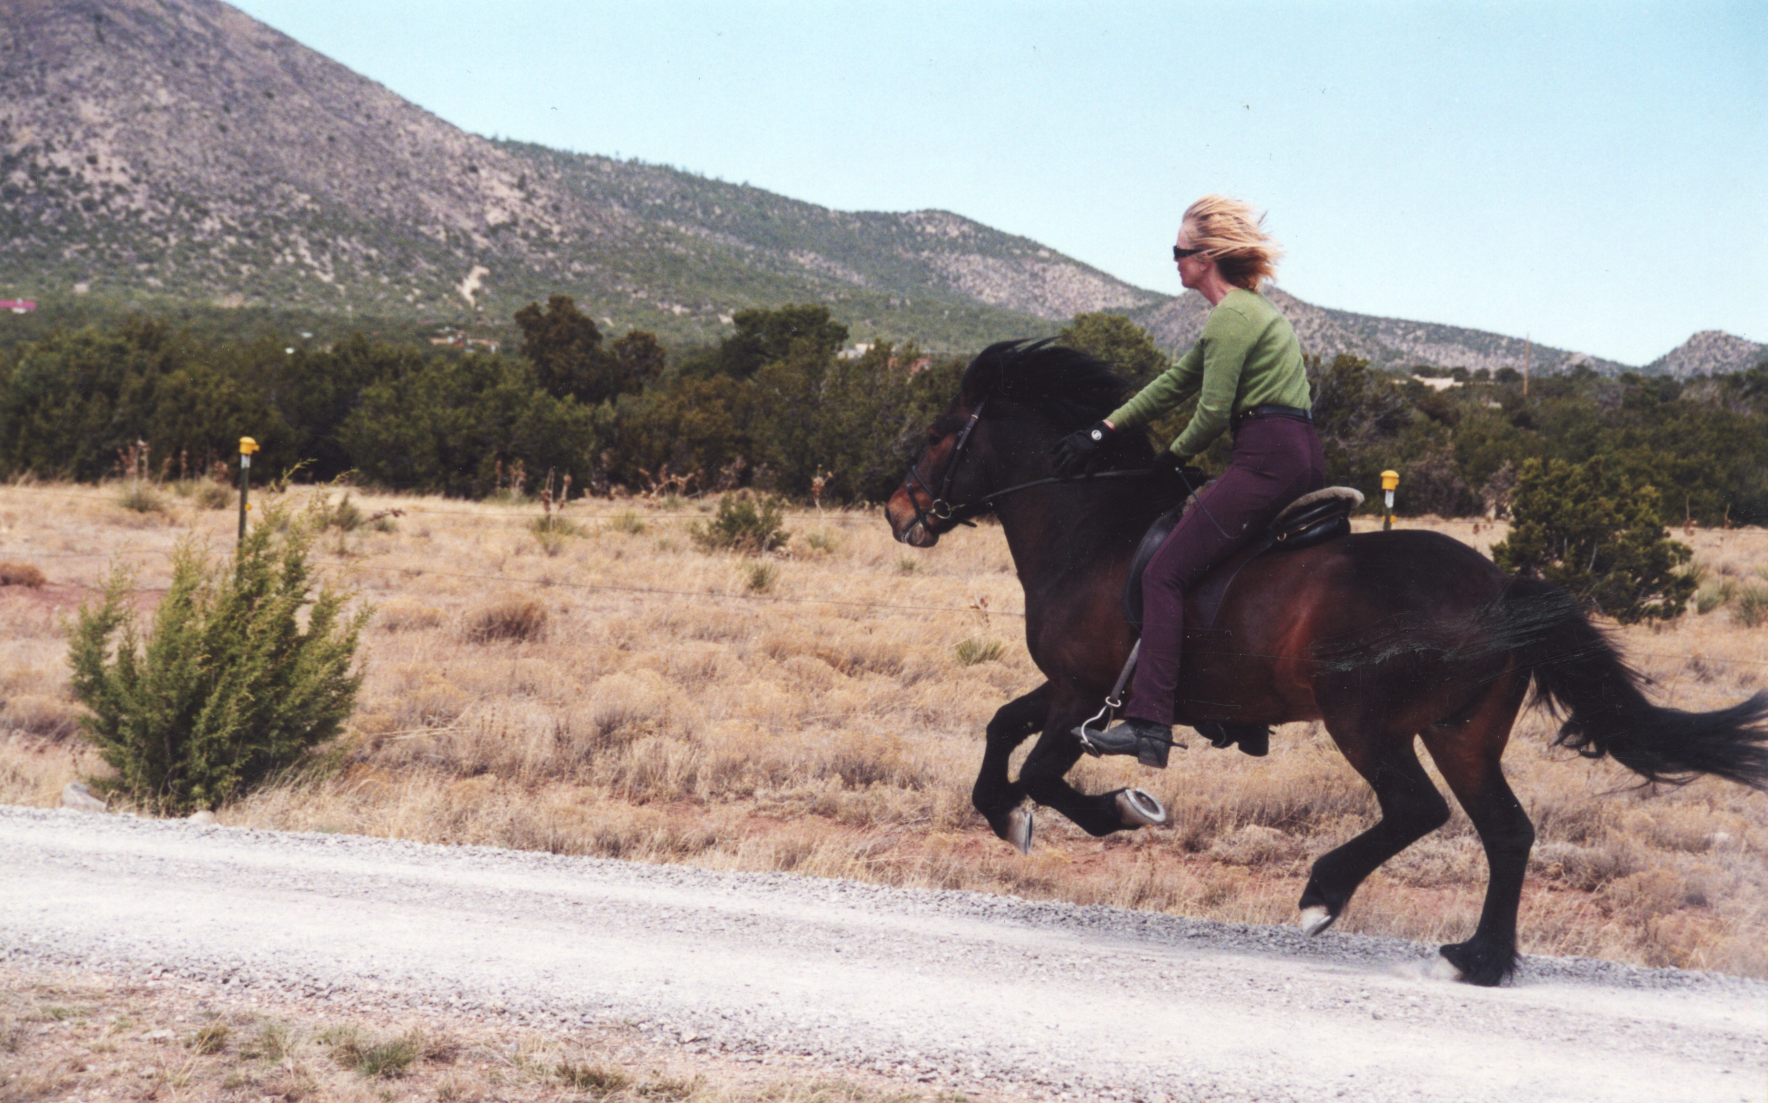 Ulla Hudson introduced the Icelandic horse to New Mexico and has continued to train, breed and import Icelandics for over three decades.